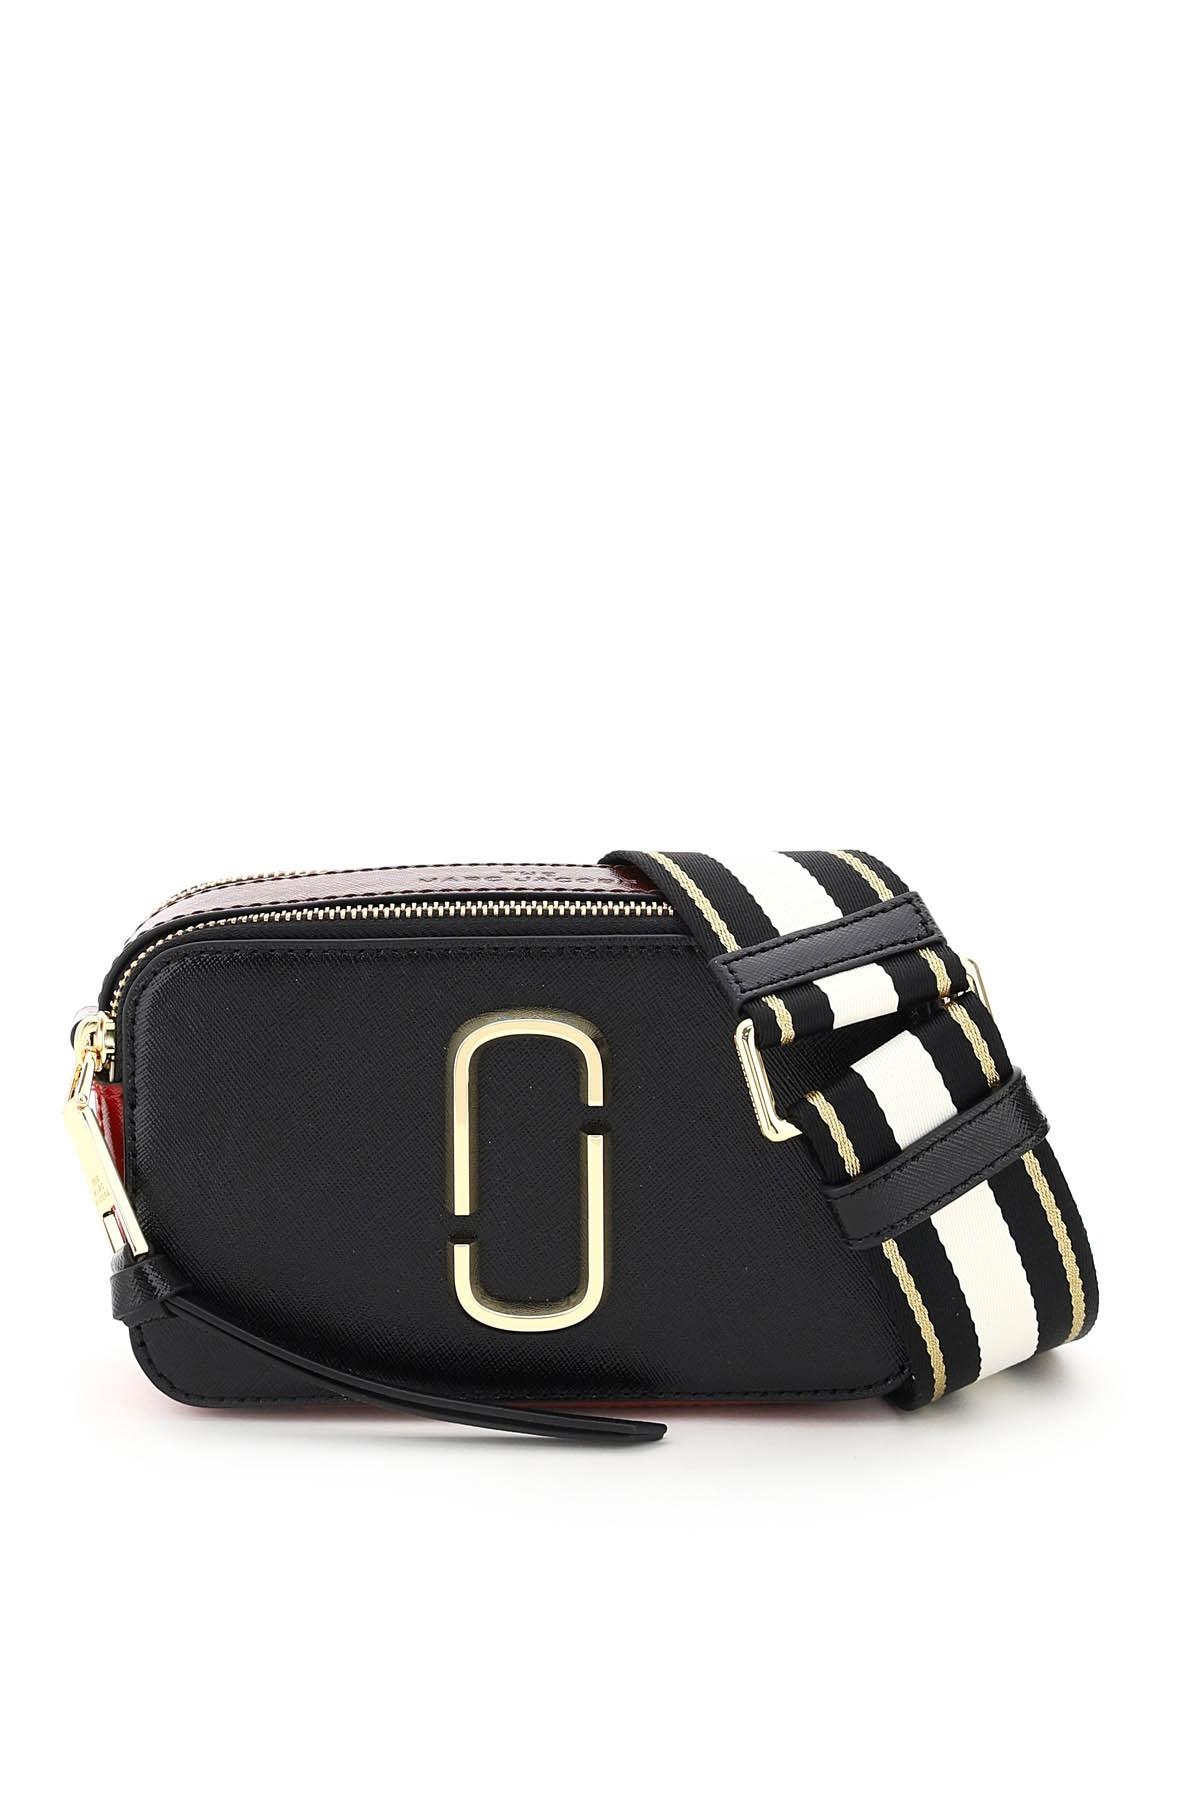 Totes bags Marc Jacobs - Black camera bag with multicolor jewels